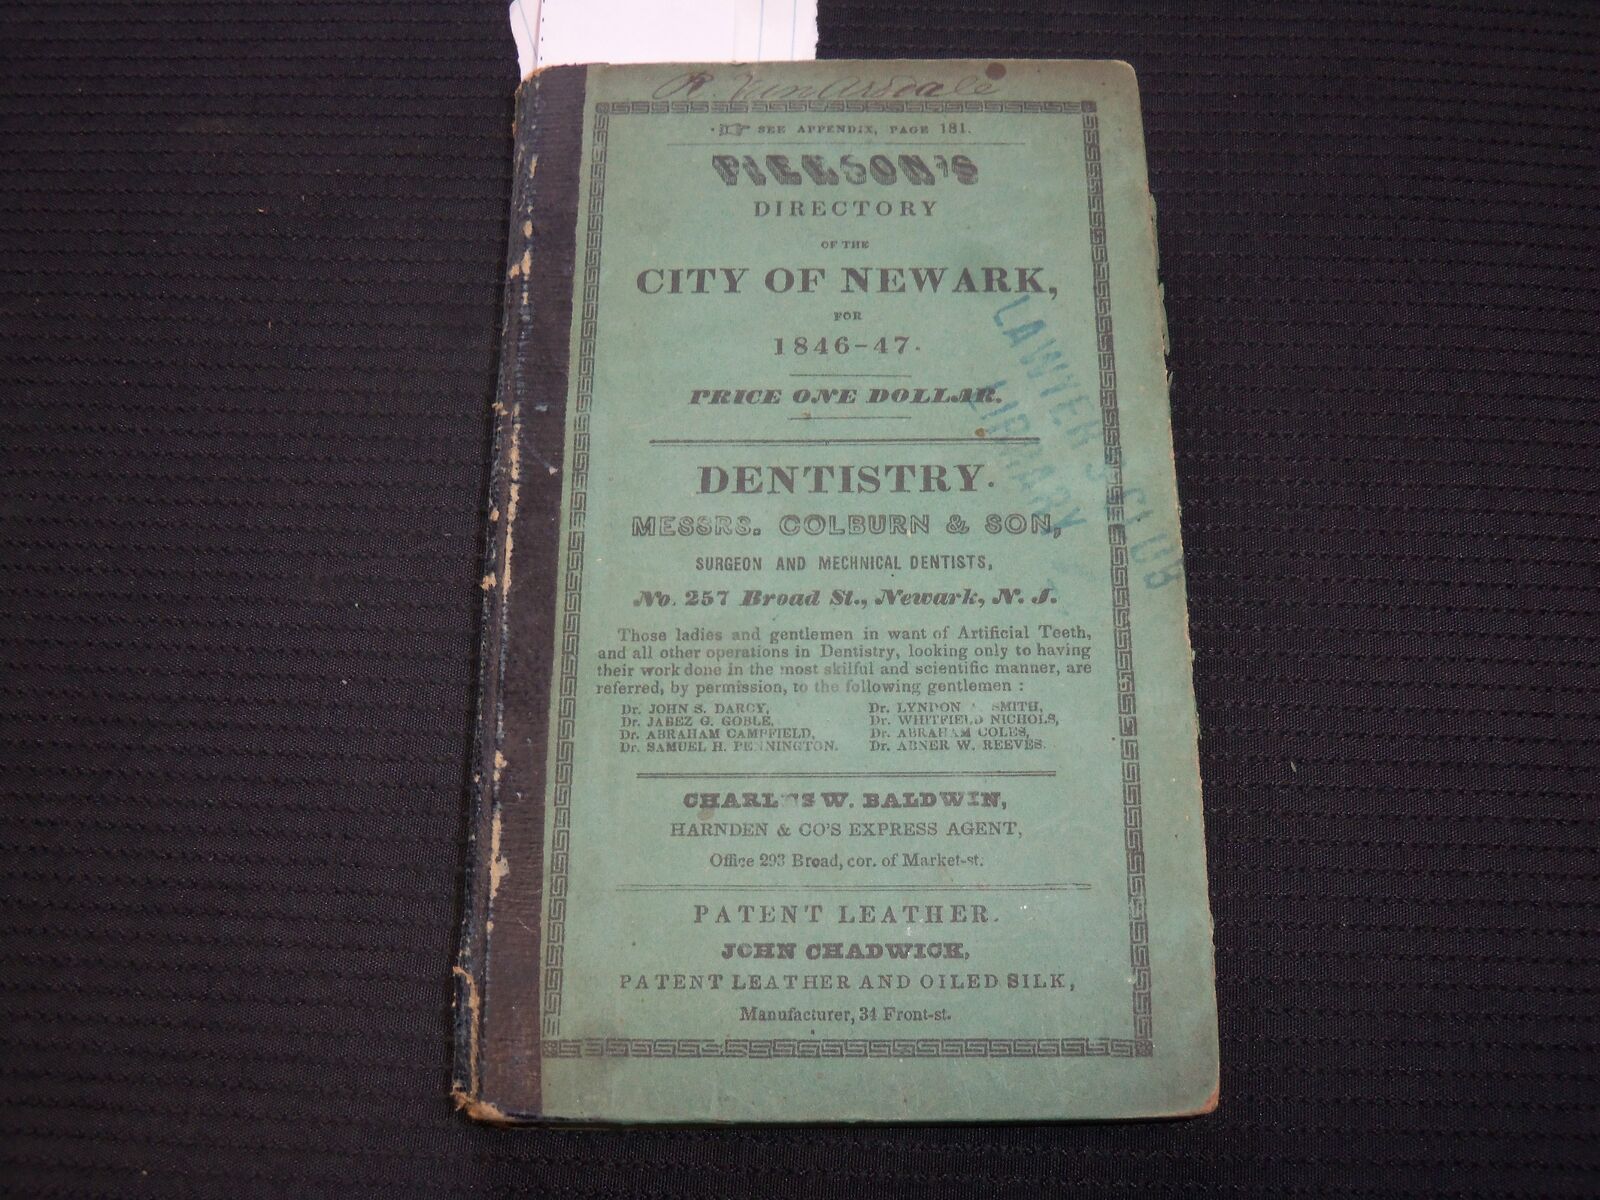 1851-1852 PIERSON'S DIRECTORY OF THE CITY OF NEWARK VOLUME - NICE ADS - KD 4501F